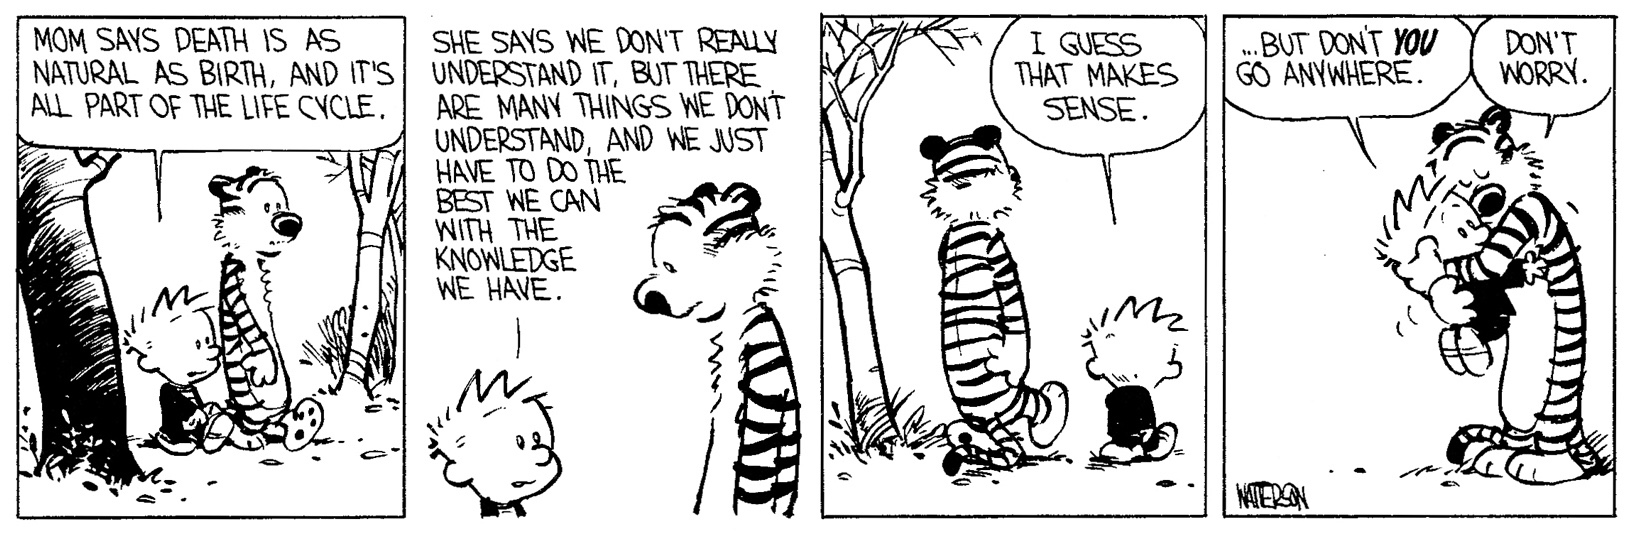 Calvin and Hobbes - Fragile Life